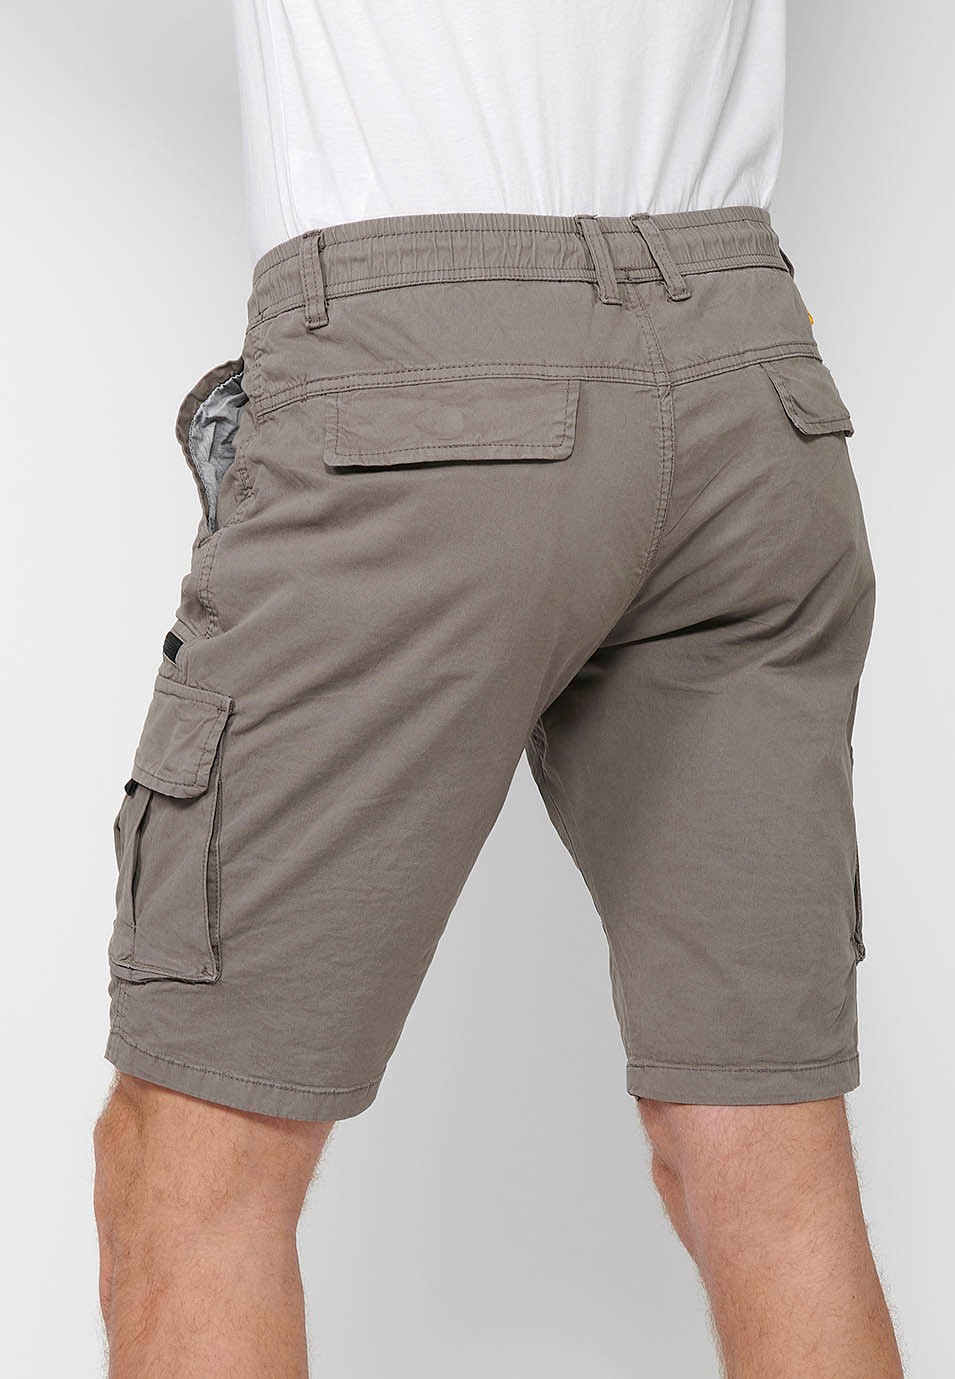 Cargo shorts with side pockets with flap and front closure with zipper and button Taupe Color for Men 8